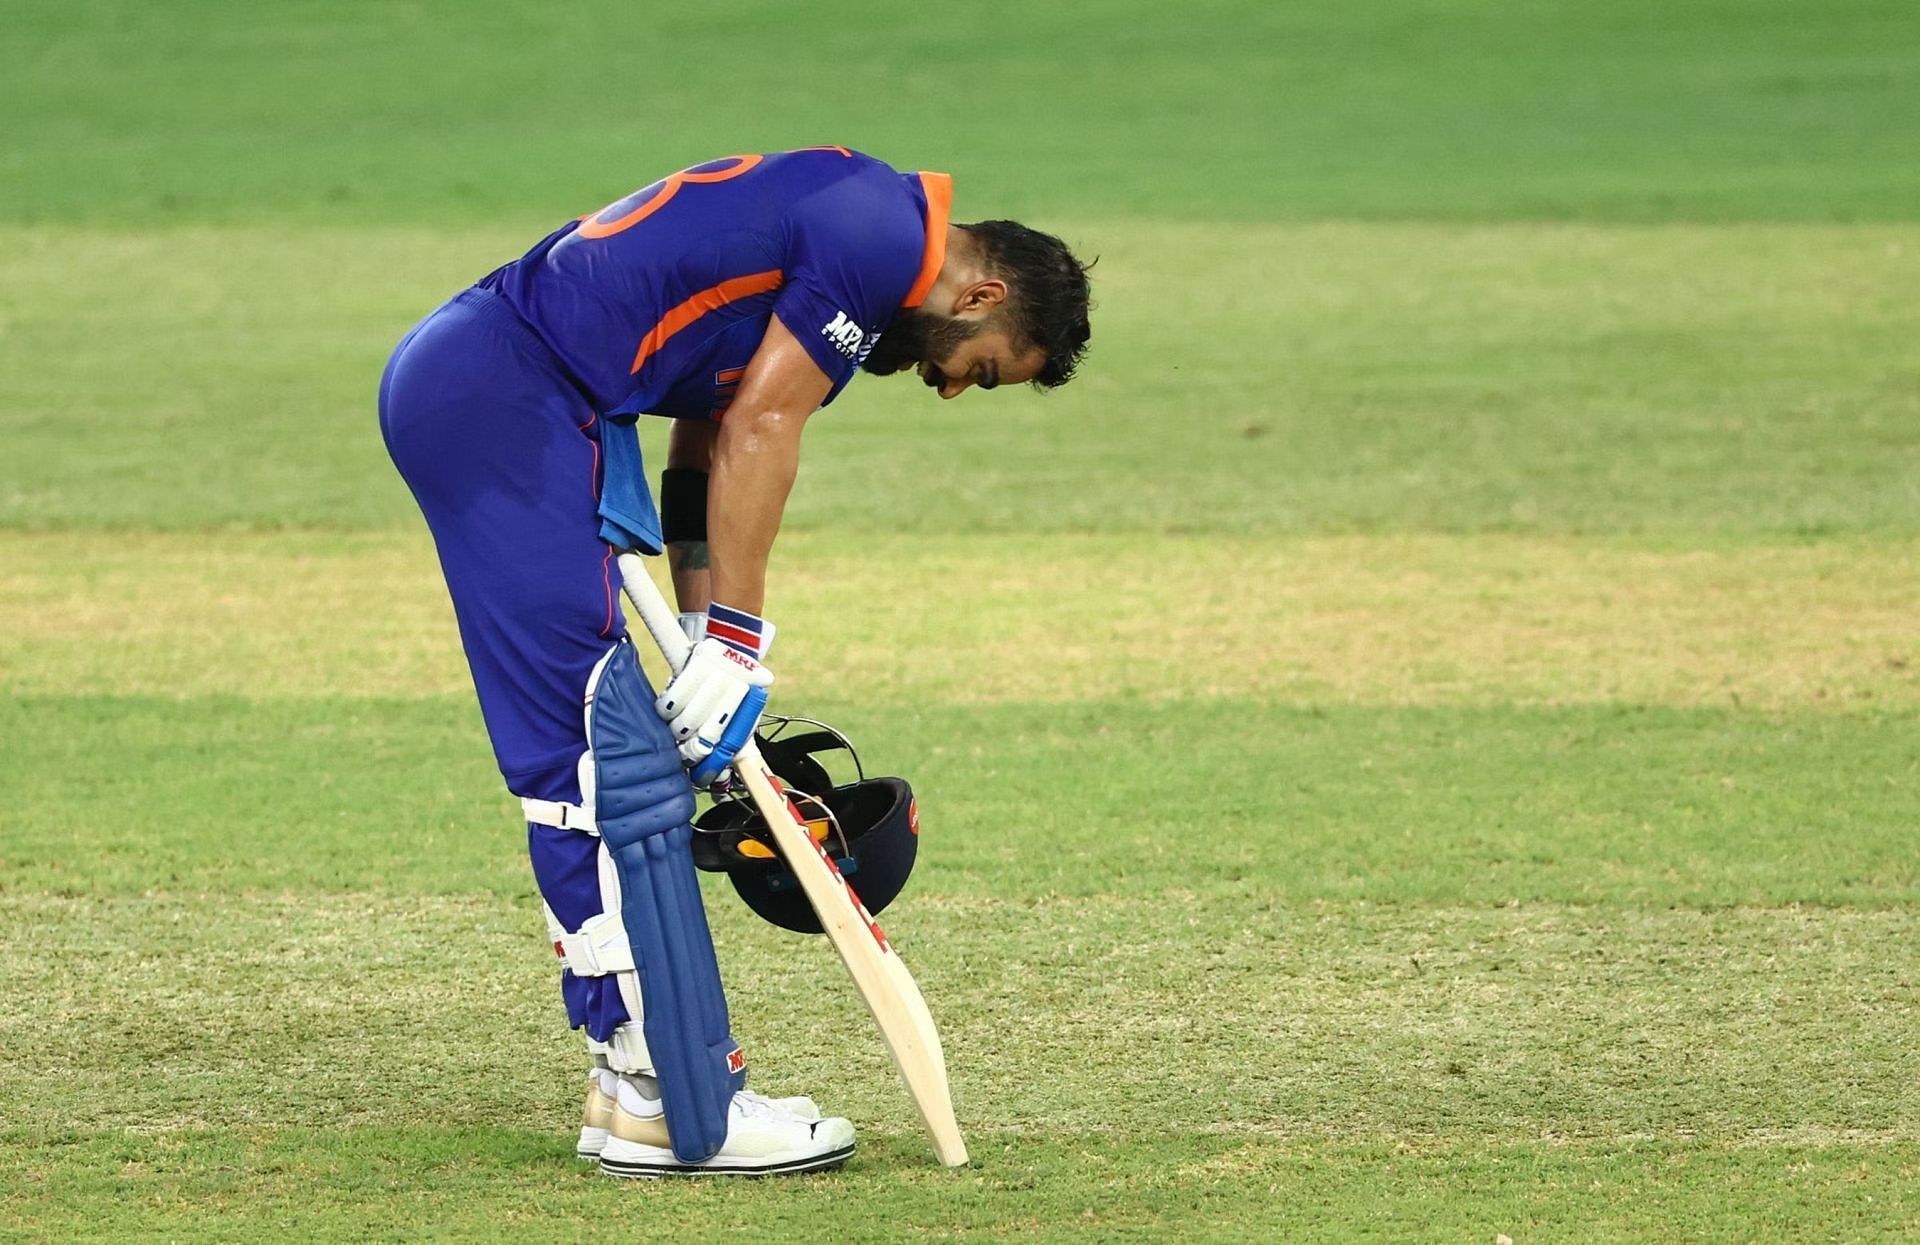 Rather unexpectedly, Kohli did not score a hundred for over 1000 days in international cricket. After a Test ton against Bangladesh in November 2019, his next three-figure score came against Afghanistan in the Asia Cup 2022 T20 clash in Dubai, when he hammered 122* off 61. (Pic: Getty Images)